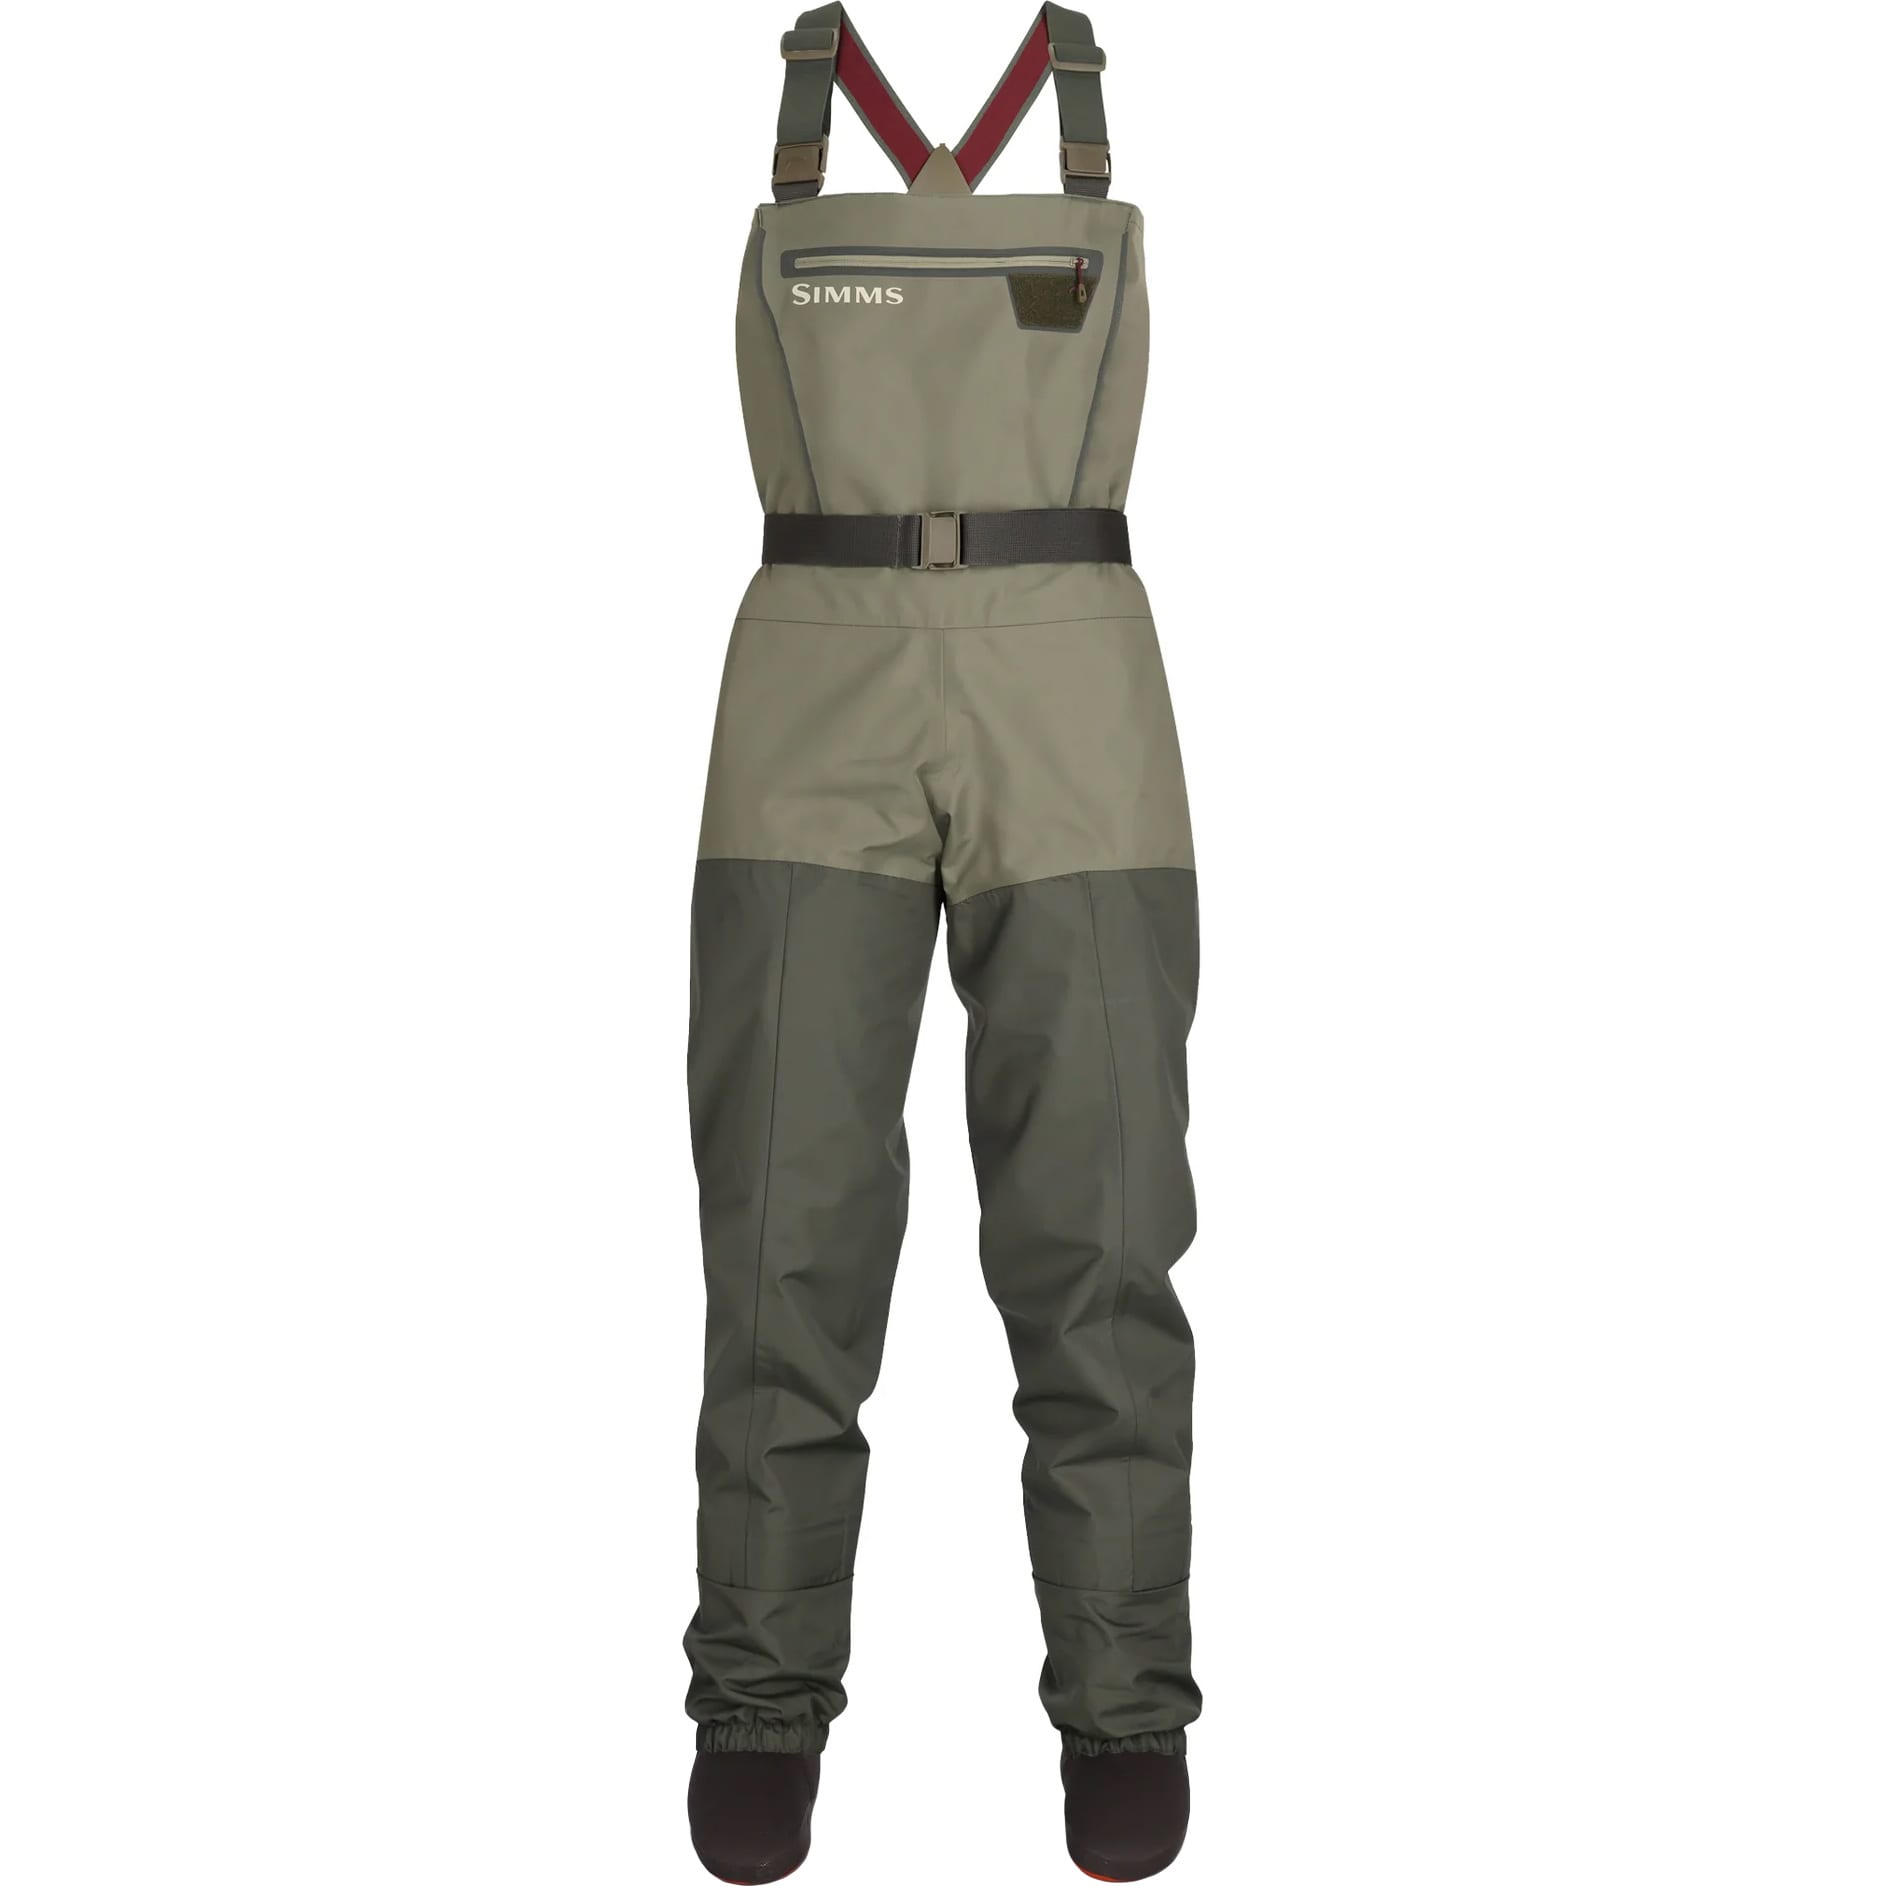 8 Fans Breathable Chest Wader 3-Ply 100% Durable and Waterproof with Neoprene Stocking Foot Insulated Waders for Fishing